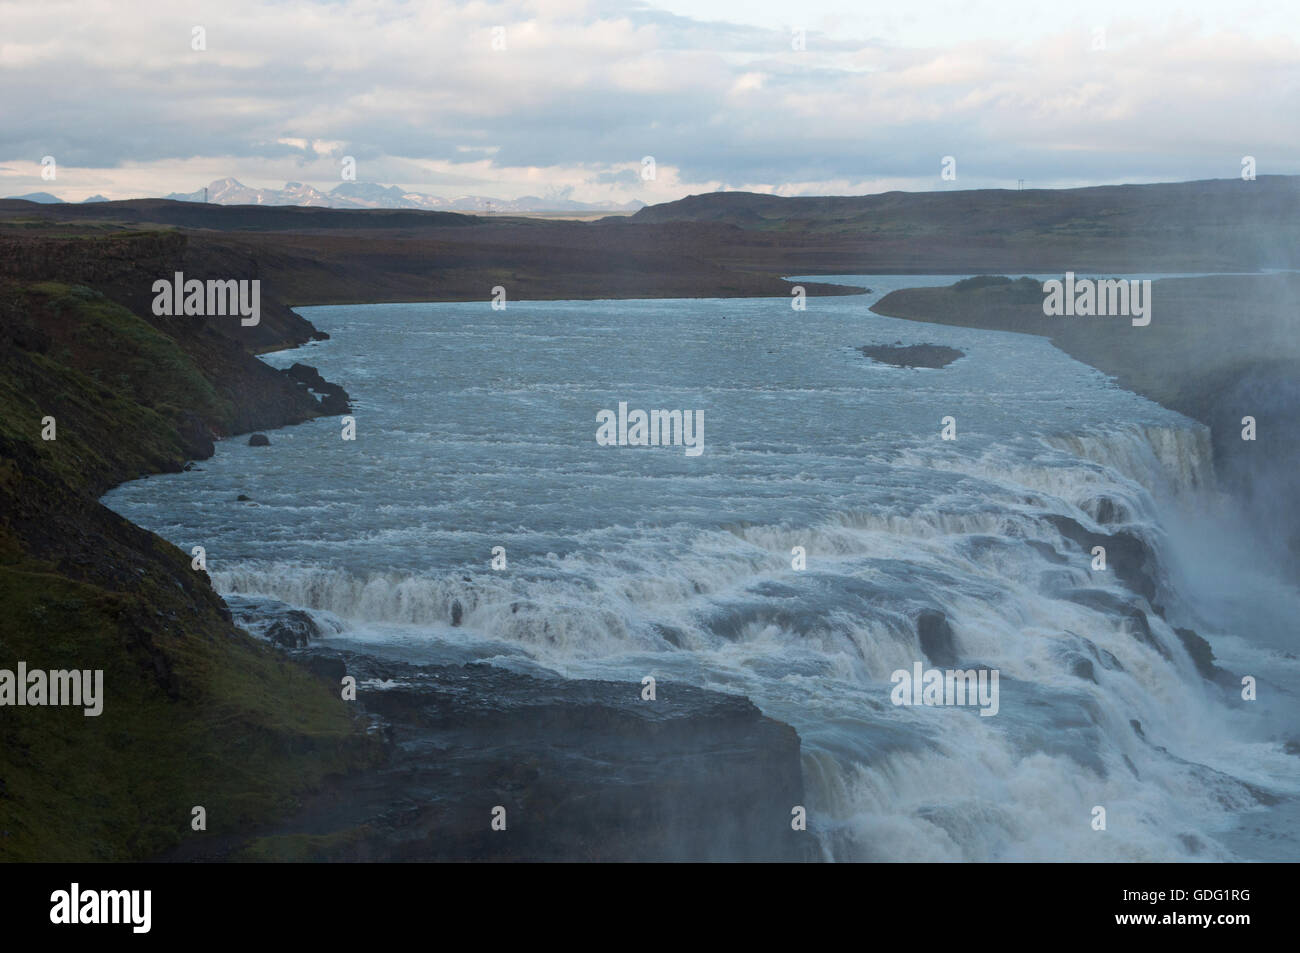 Iceland: the Hvíta river which flows into Gullfoss waterfall, the Golden Fall, one of the most popular tourist attractions Stock Photo